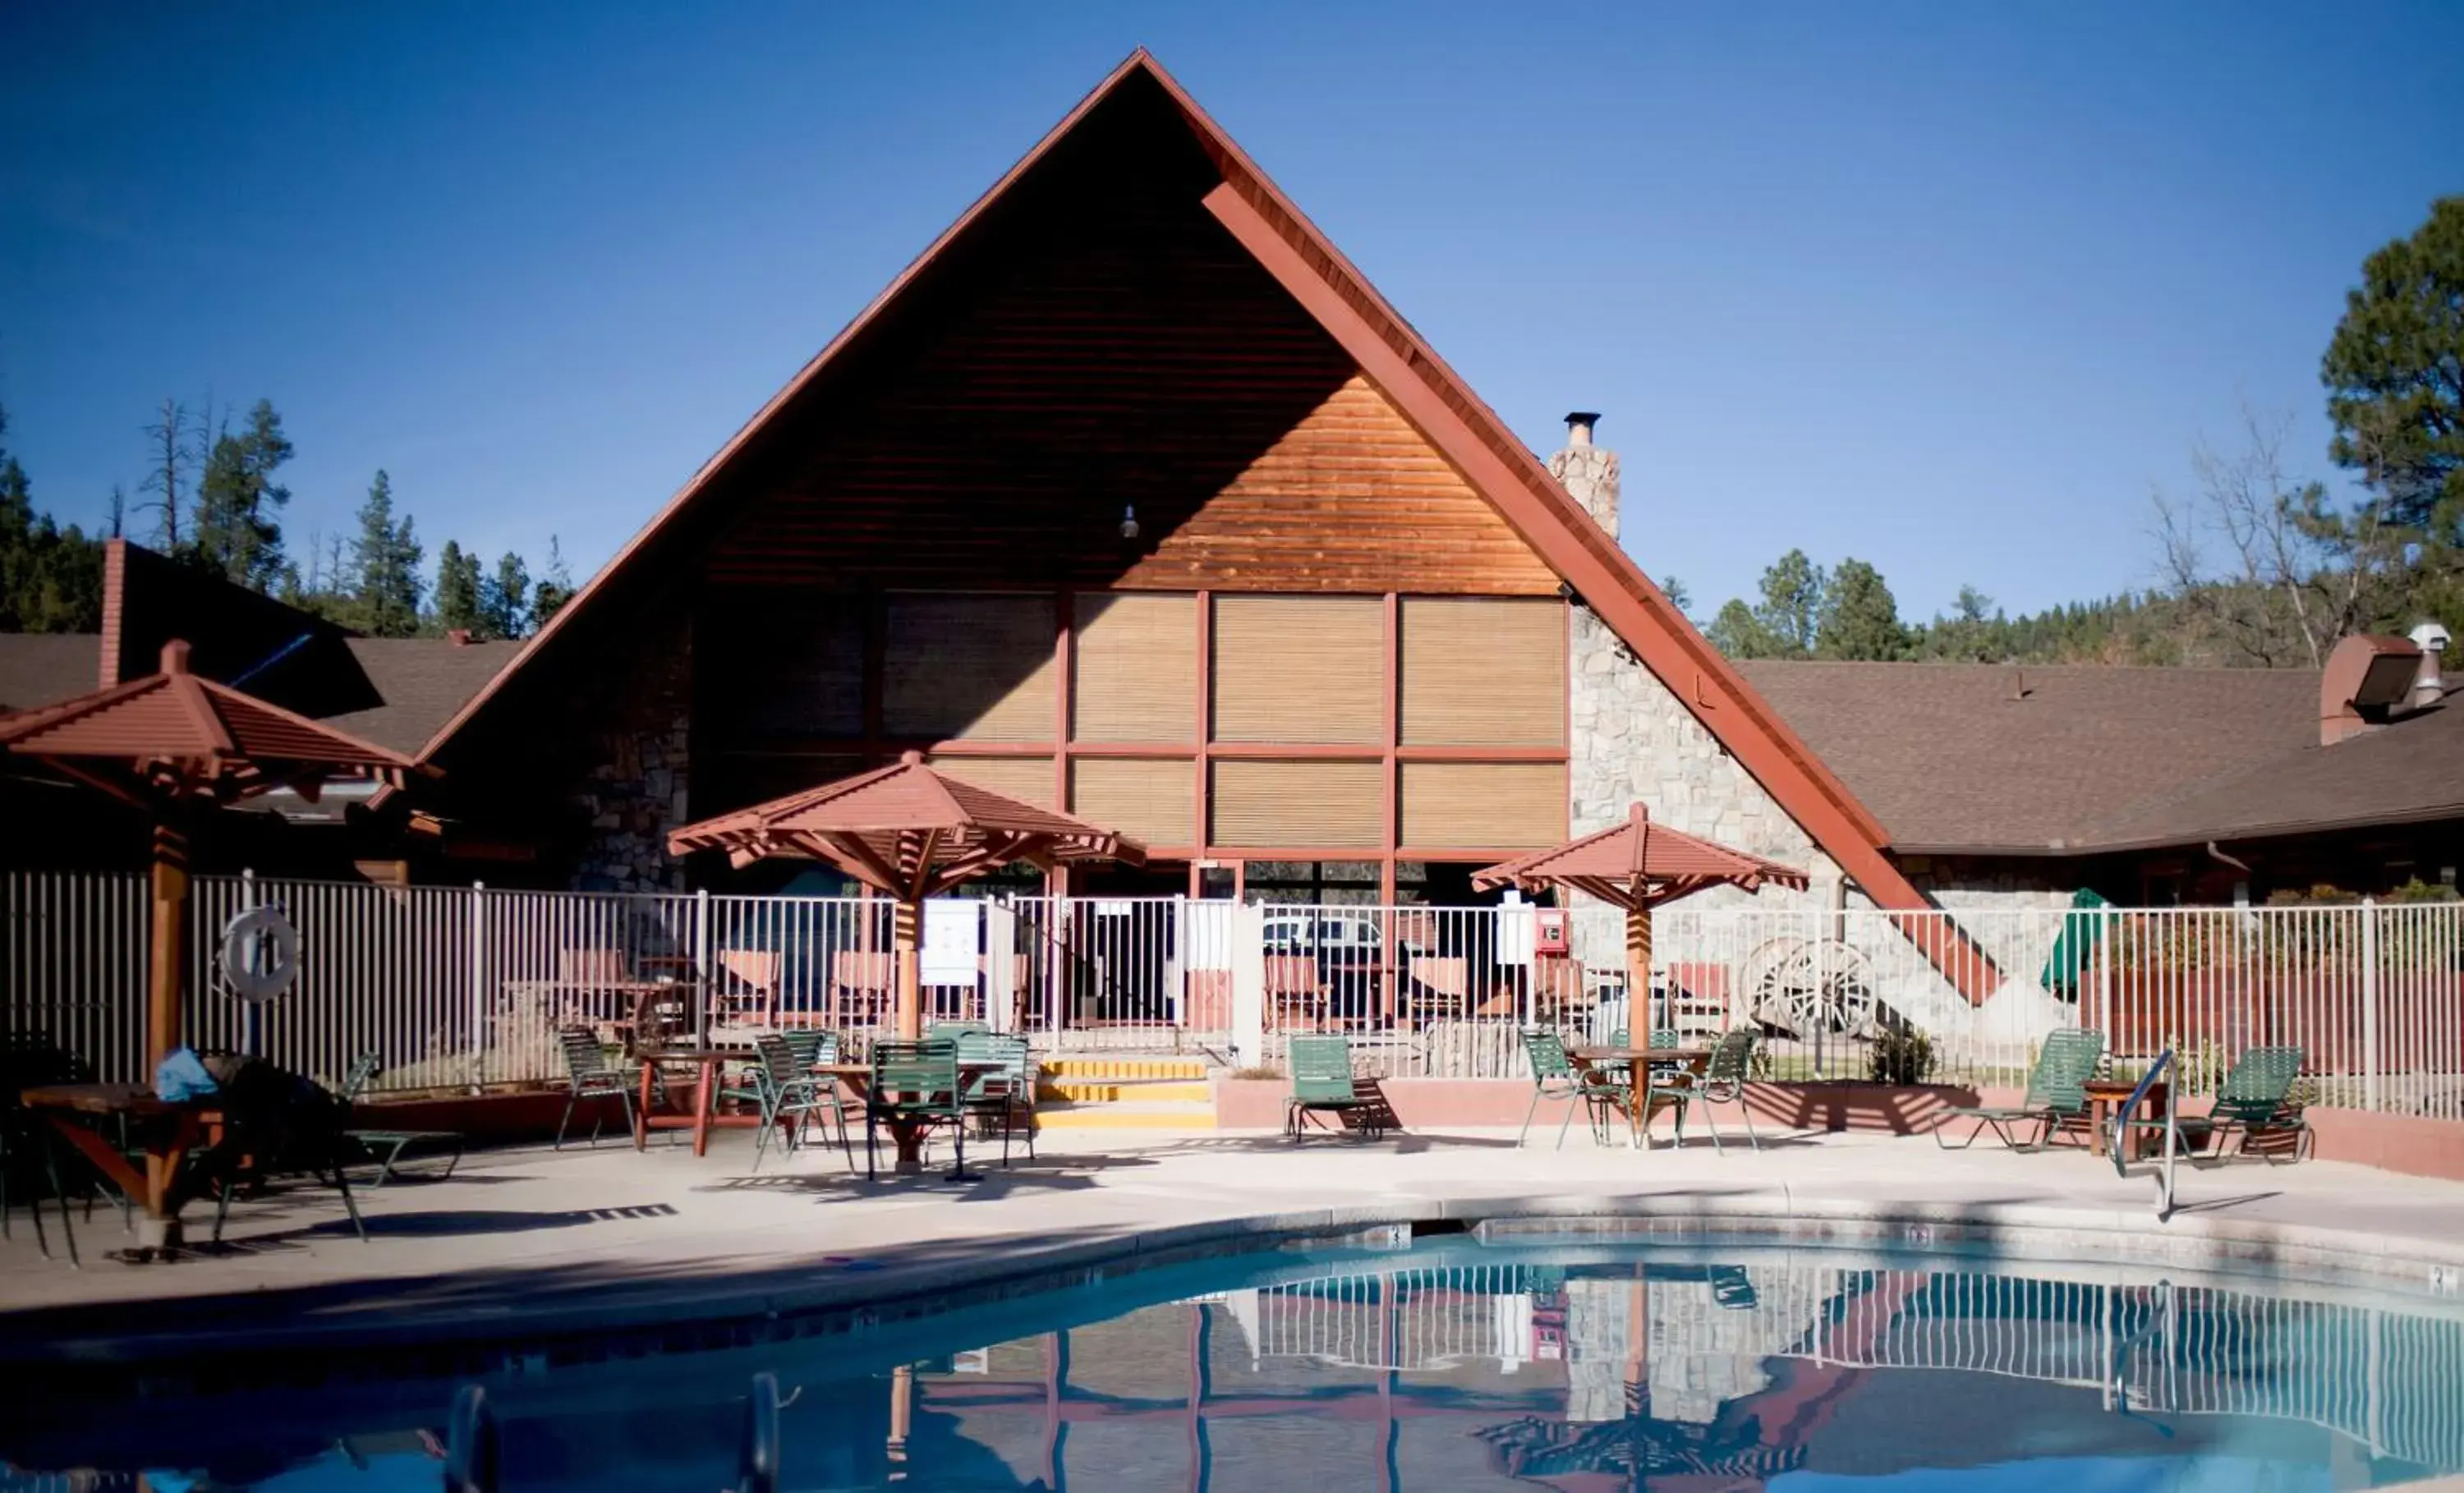 Swimming pool, Property Building in Kohl's Ranch Lodge